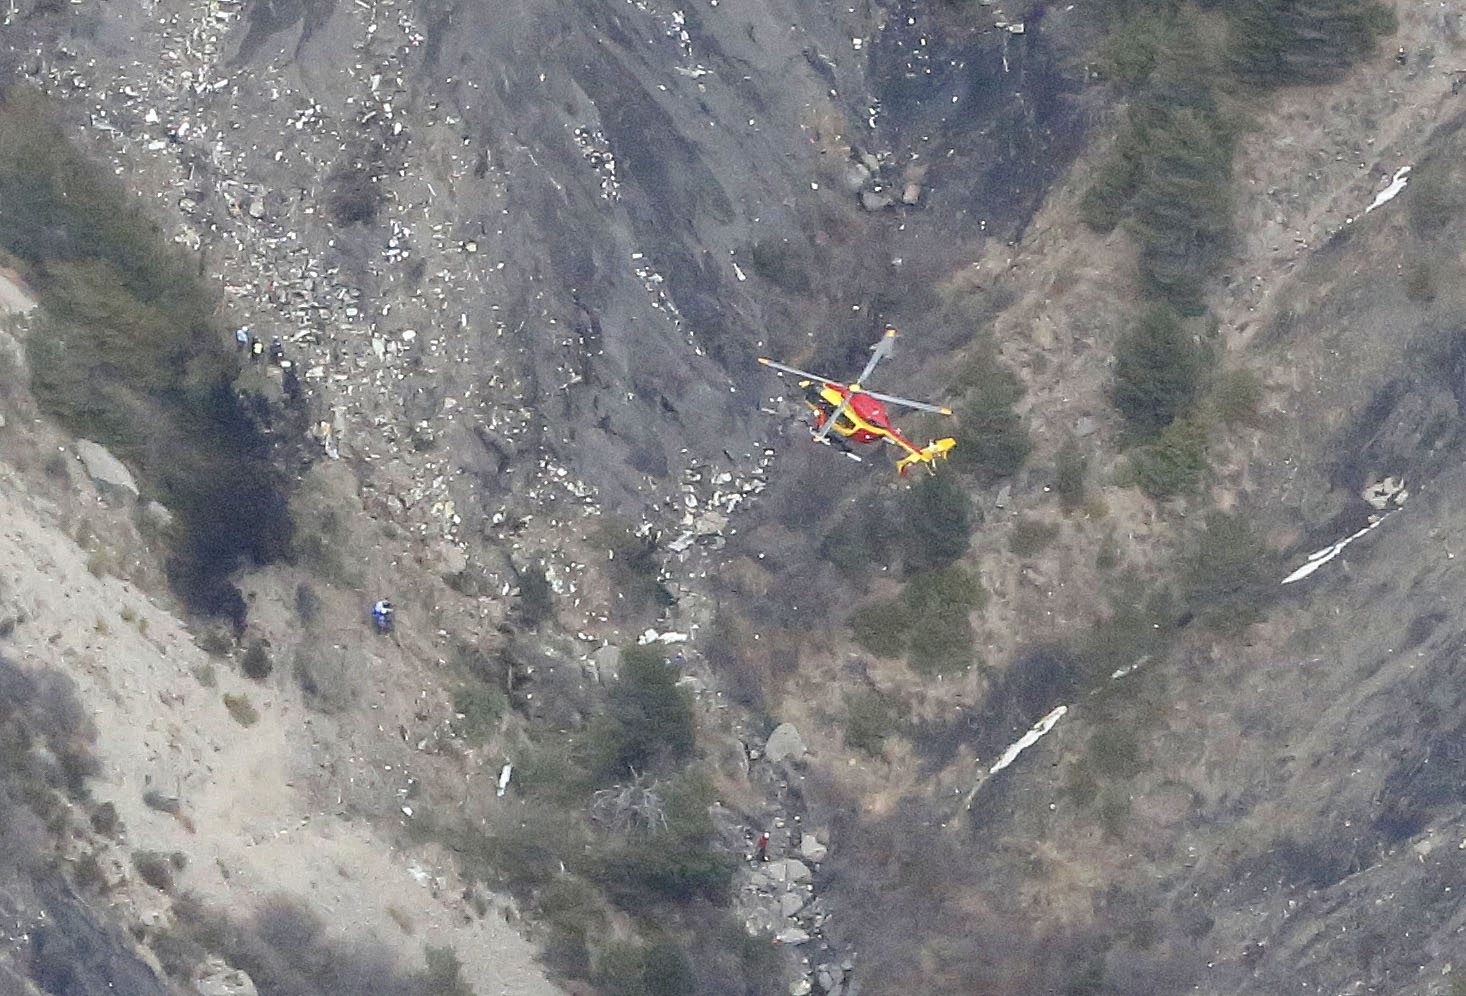 PHOTO: Wreckage is seen where a Germanwings Airbus A320 airliner has crashed in the French Alps between Barcelonnette and Digne on March 24, 2015.